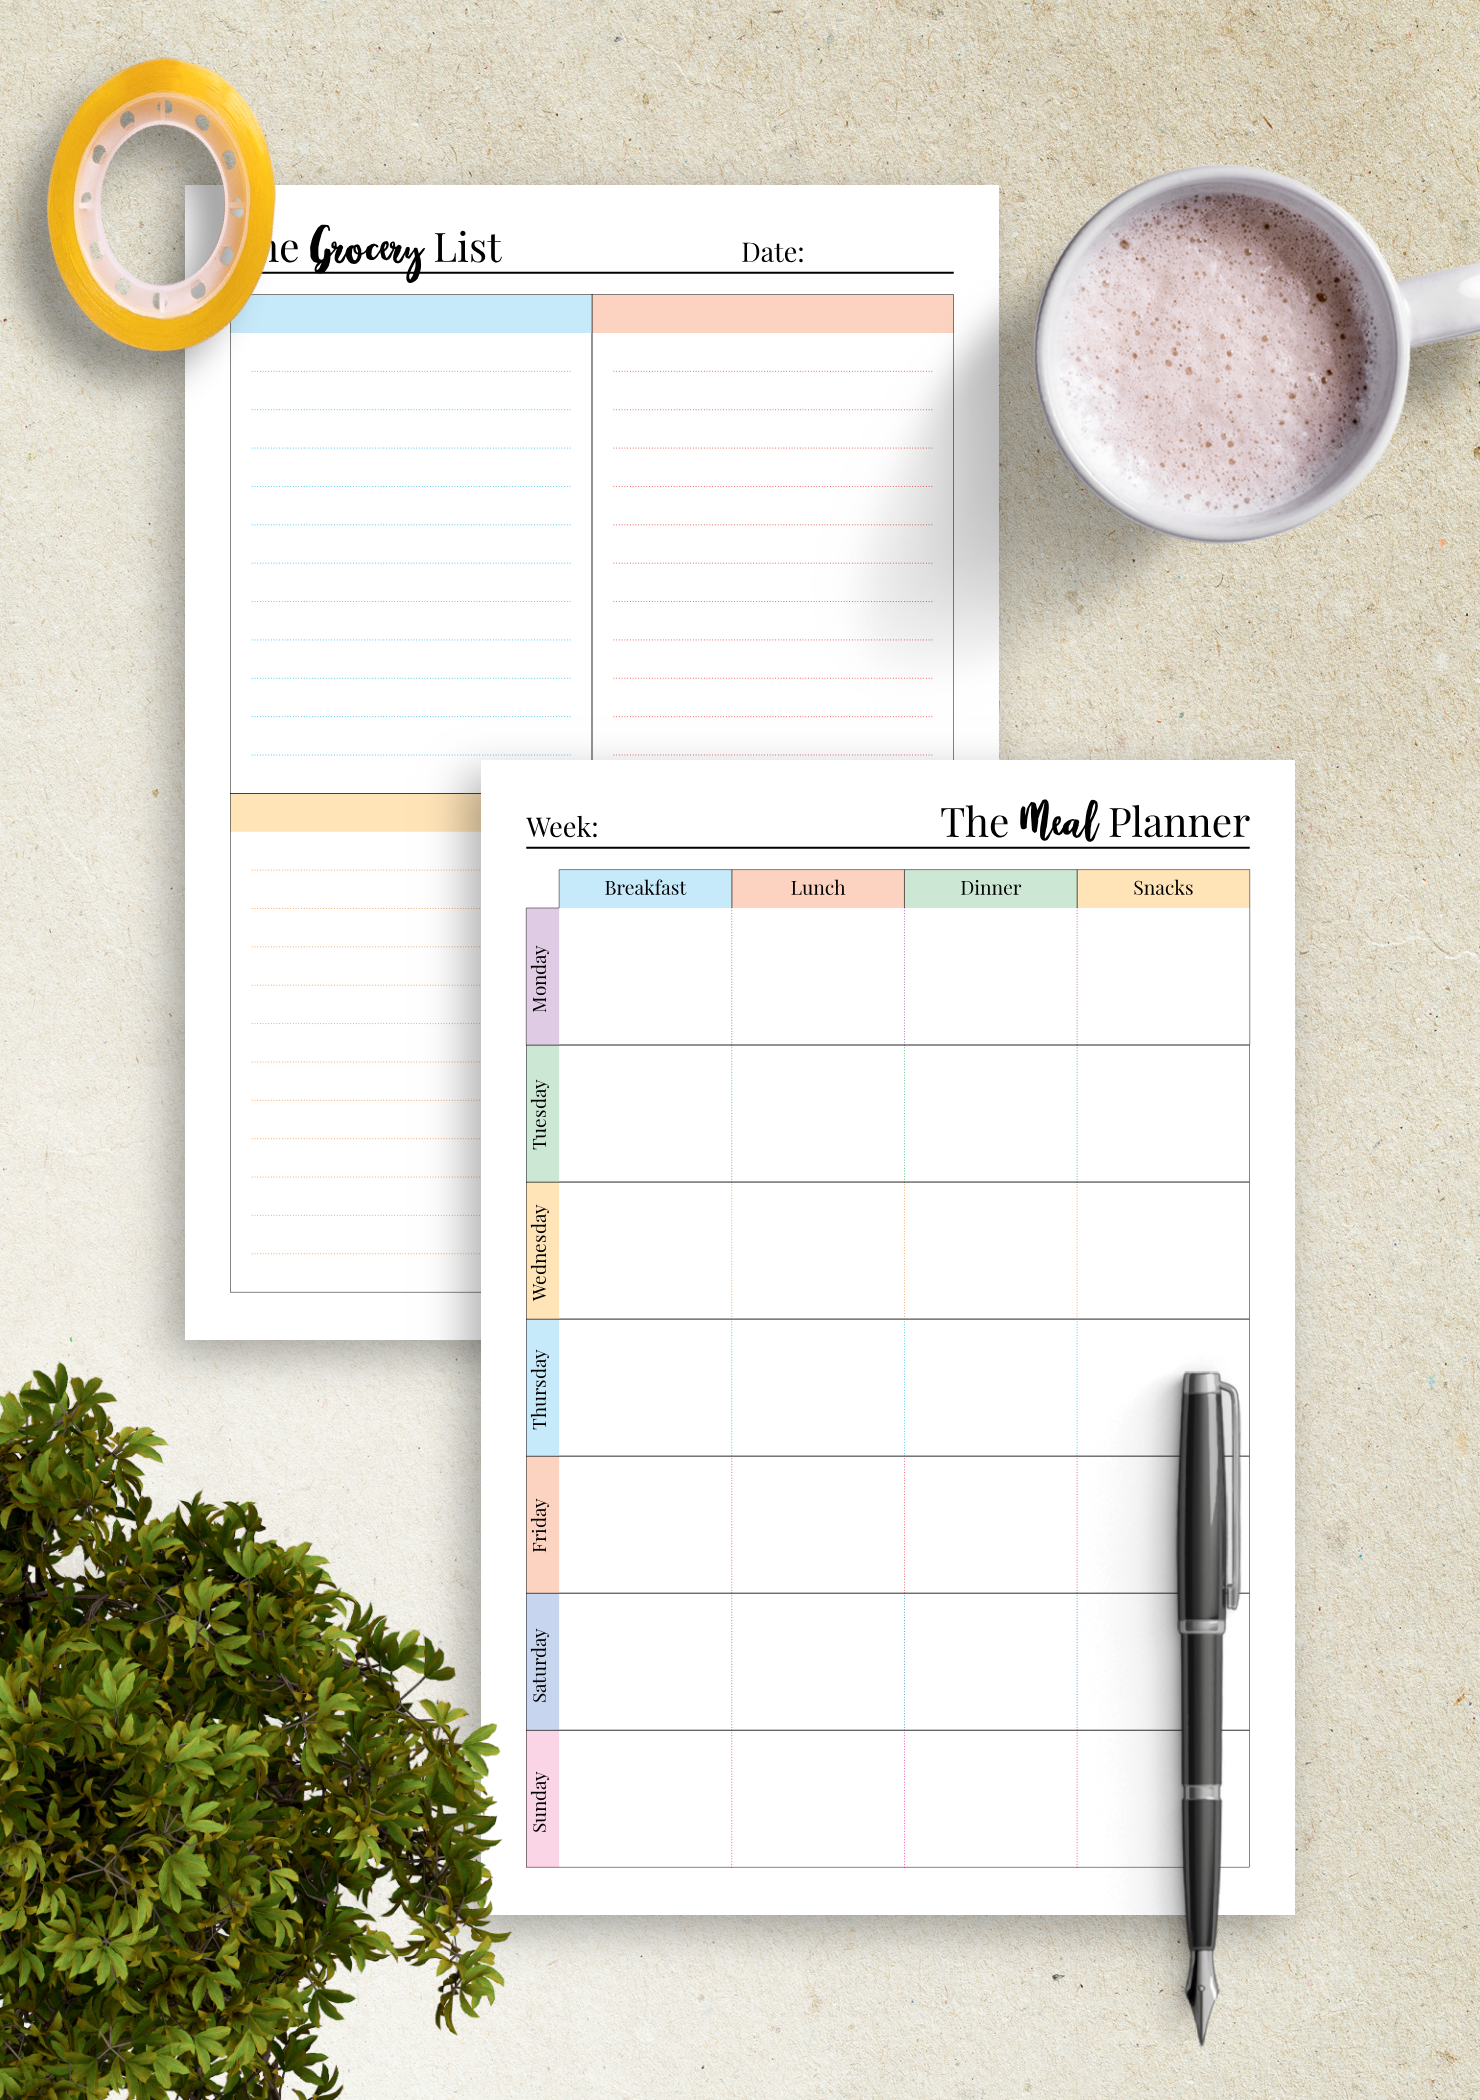 weekly meal planner with grocery list